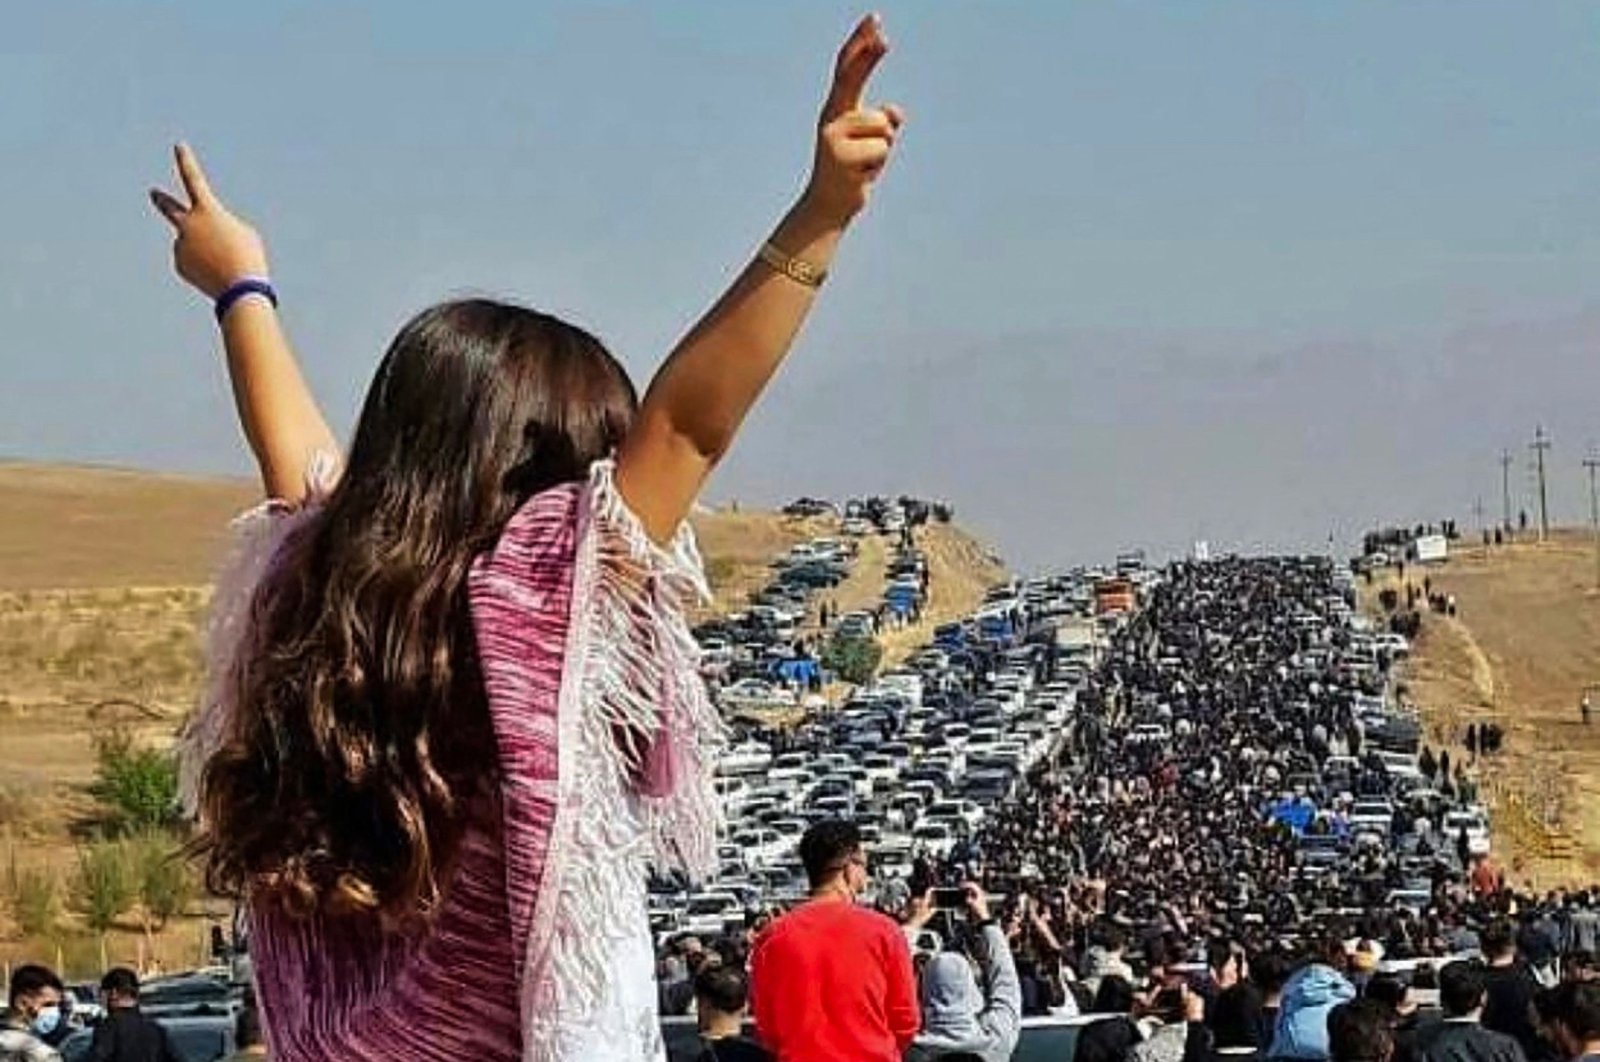 A woman stands on top of a vehicle as thousands make their way toward Mahsa Amini&#039;s grave, Saqez, Iran, Oct. 26, 2022. (AFP Photo)